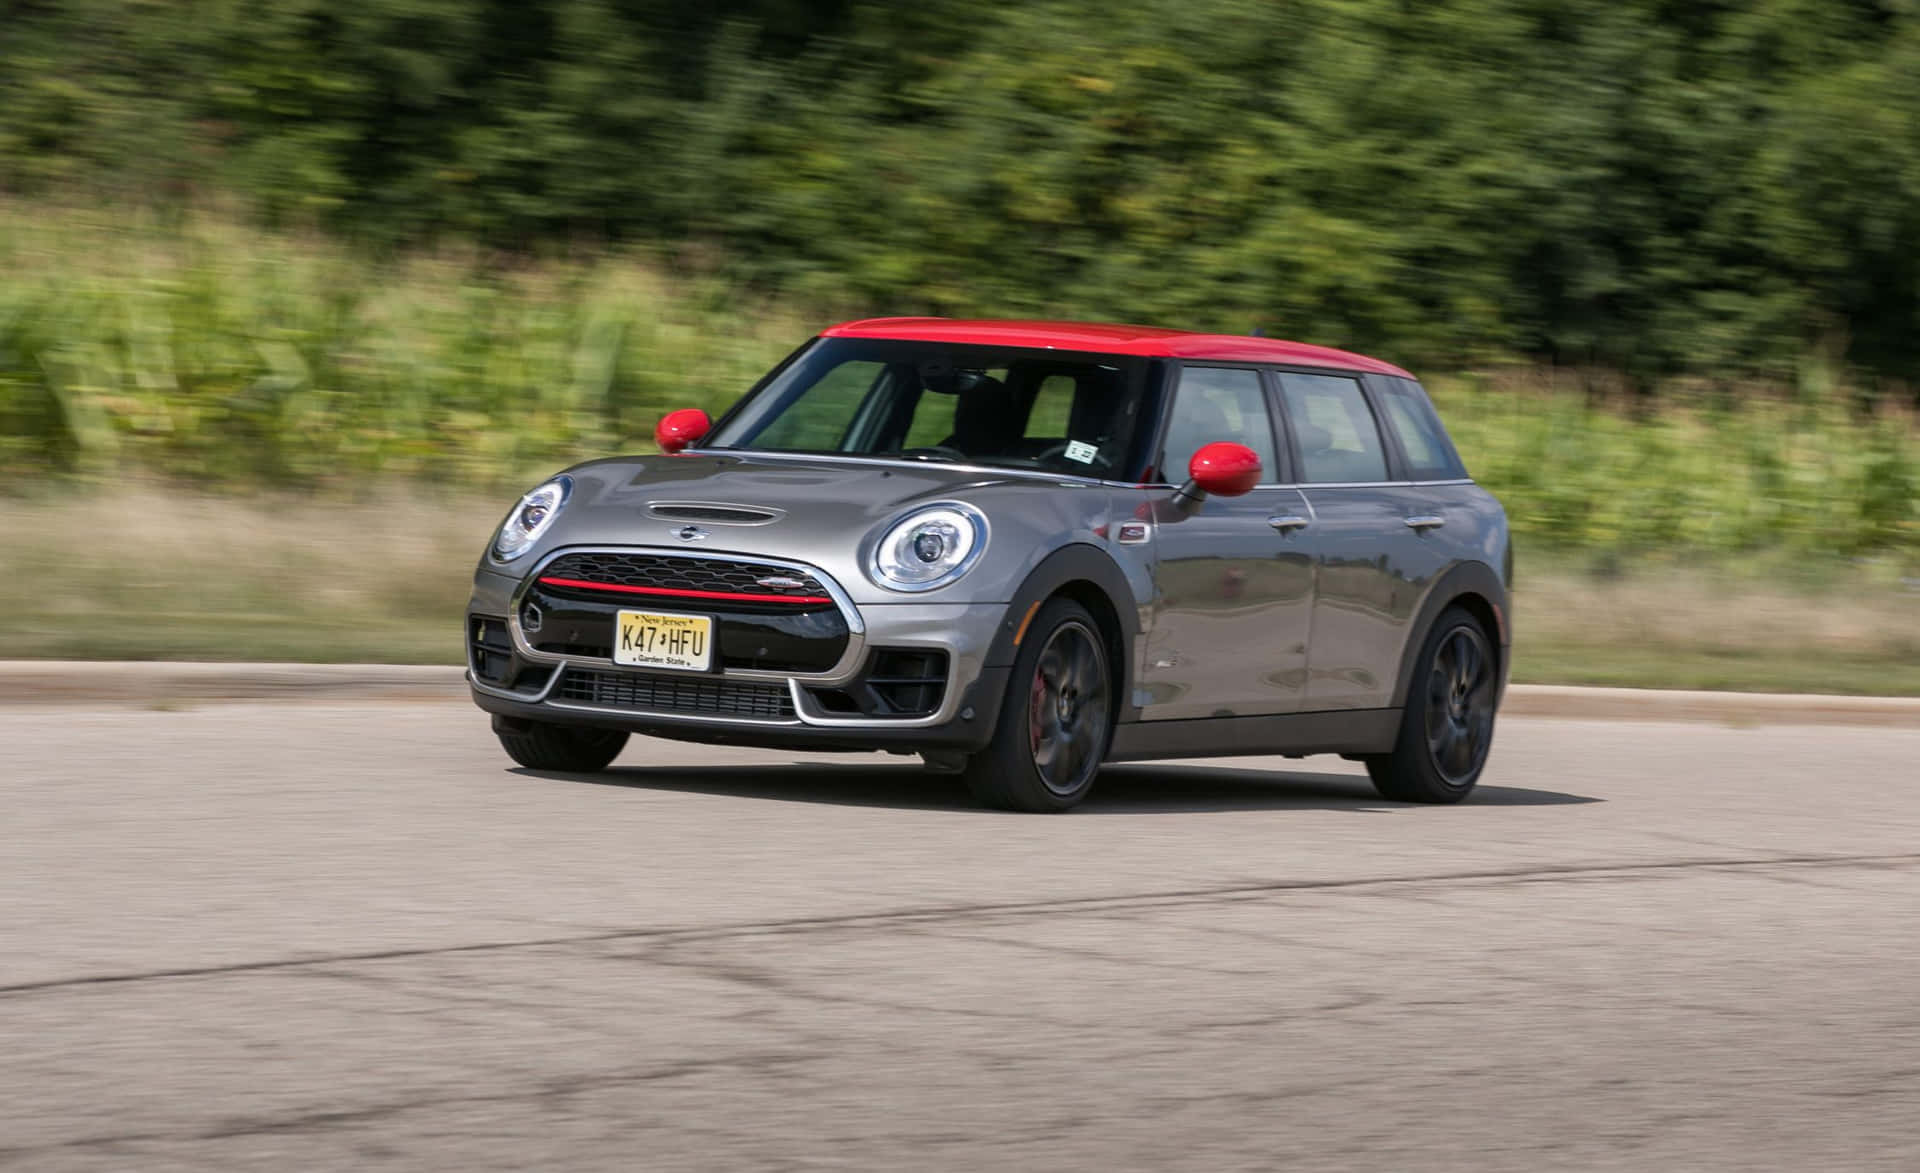 Captivating Mini Cooper S Clubman All4 in action Wallpaper